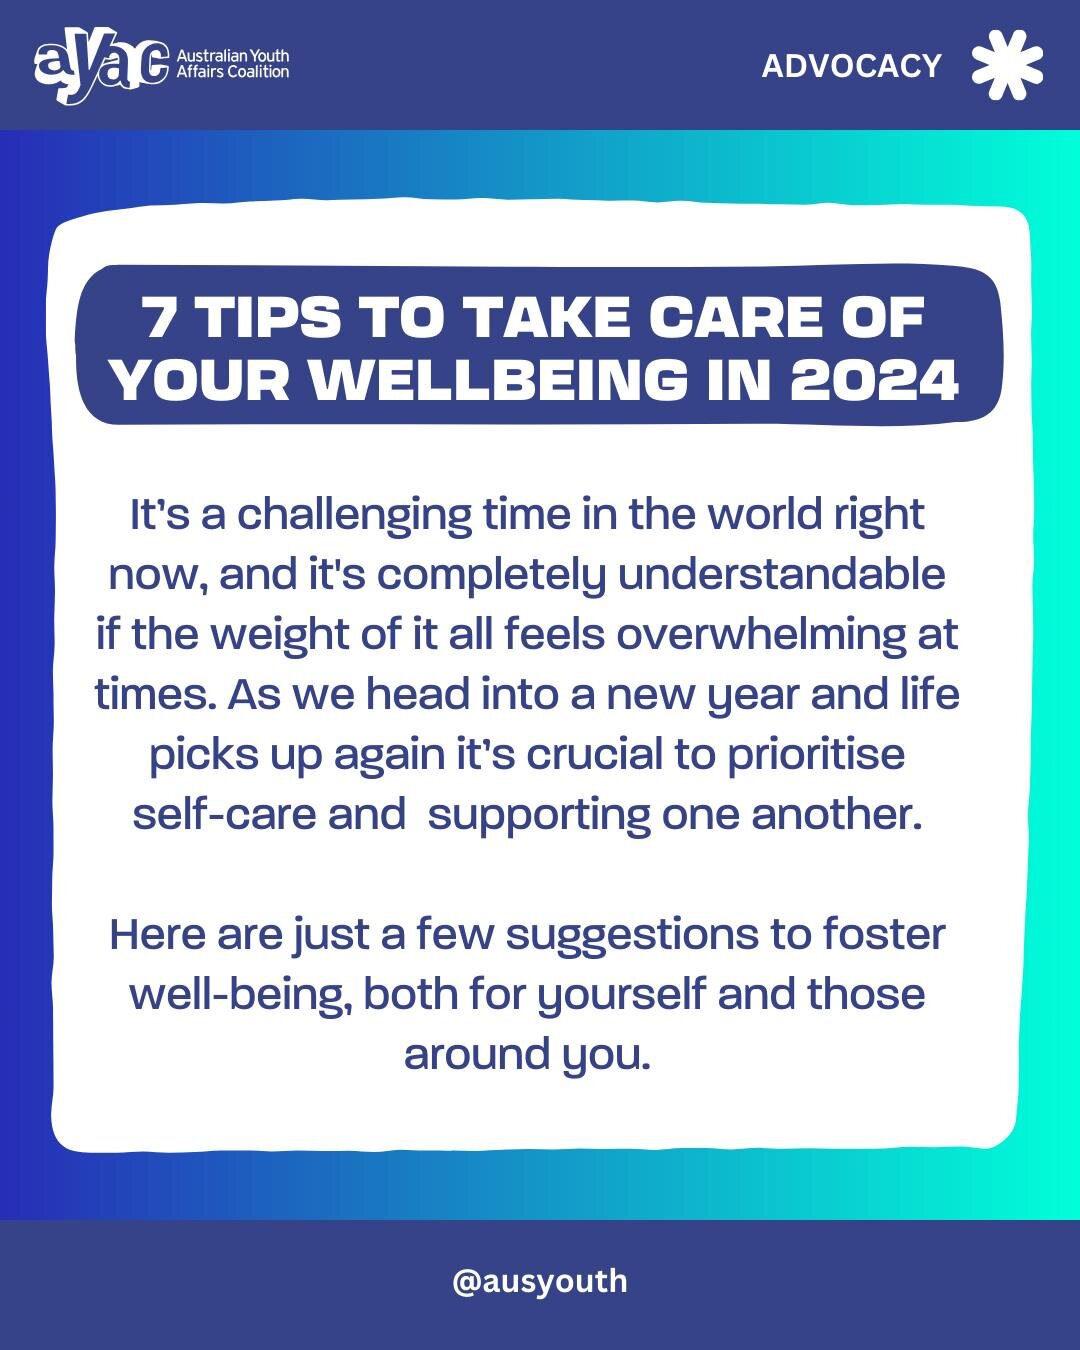 It&rsquo;s a challenging time in the world right now, and it's completely understandable if the weight of it all feels overwhelming at times. As we head into a new year and life picks up again, prioritising self-care and supporting one another has be